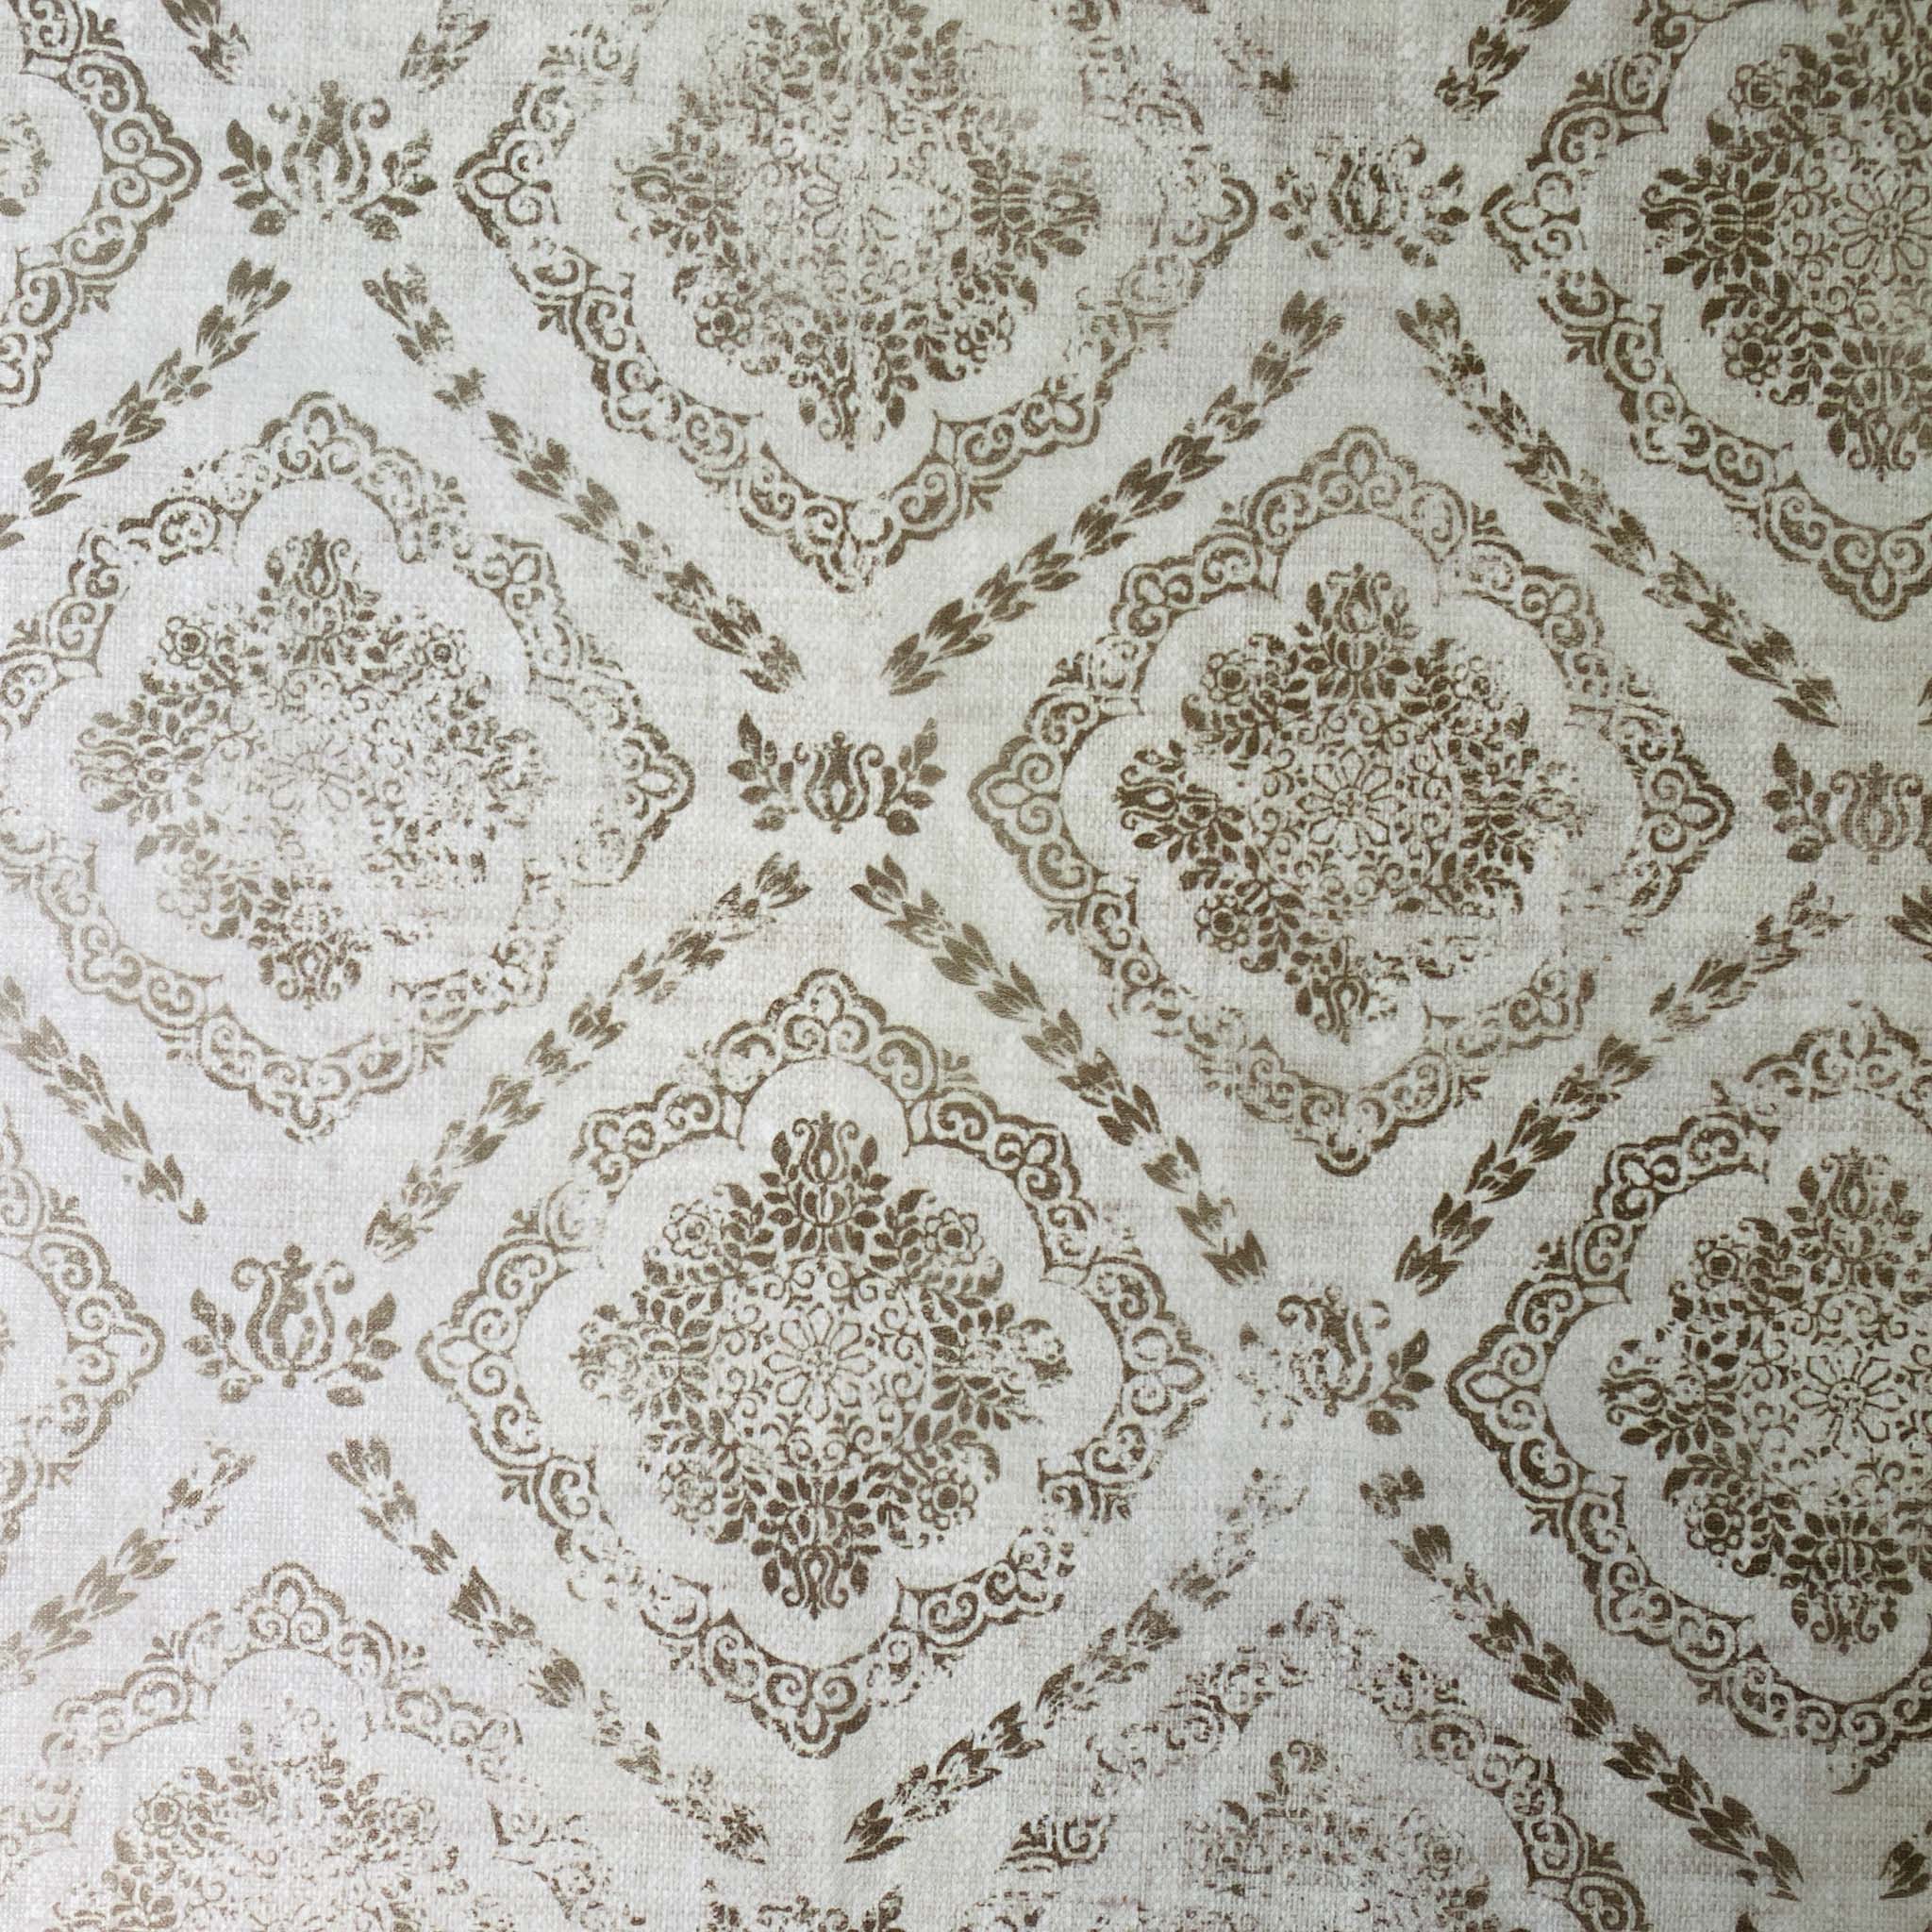 Close-up of a tissue paper design that features a repeating floral diamond pattern against a soft grey background.